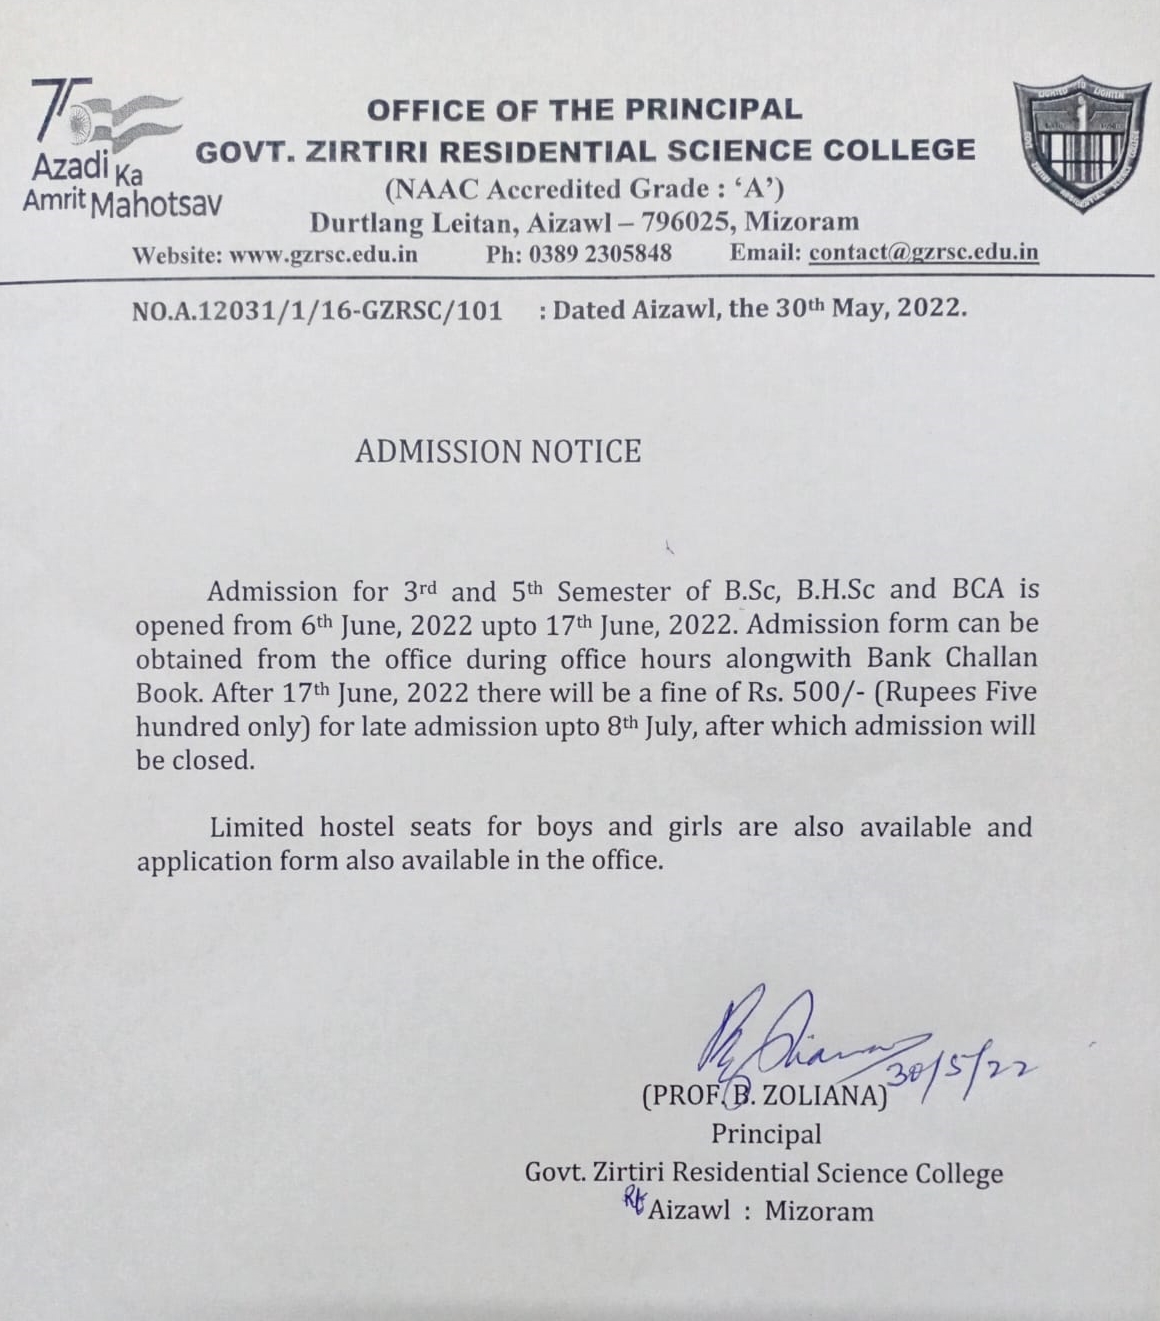 Admission Notice for 3rd and 5th semesters